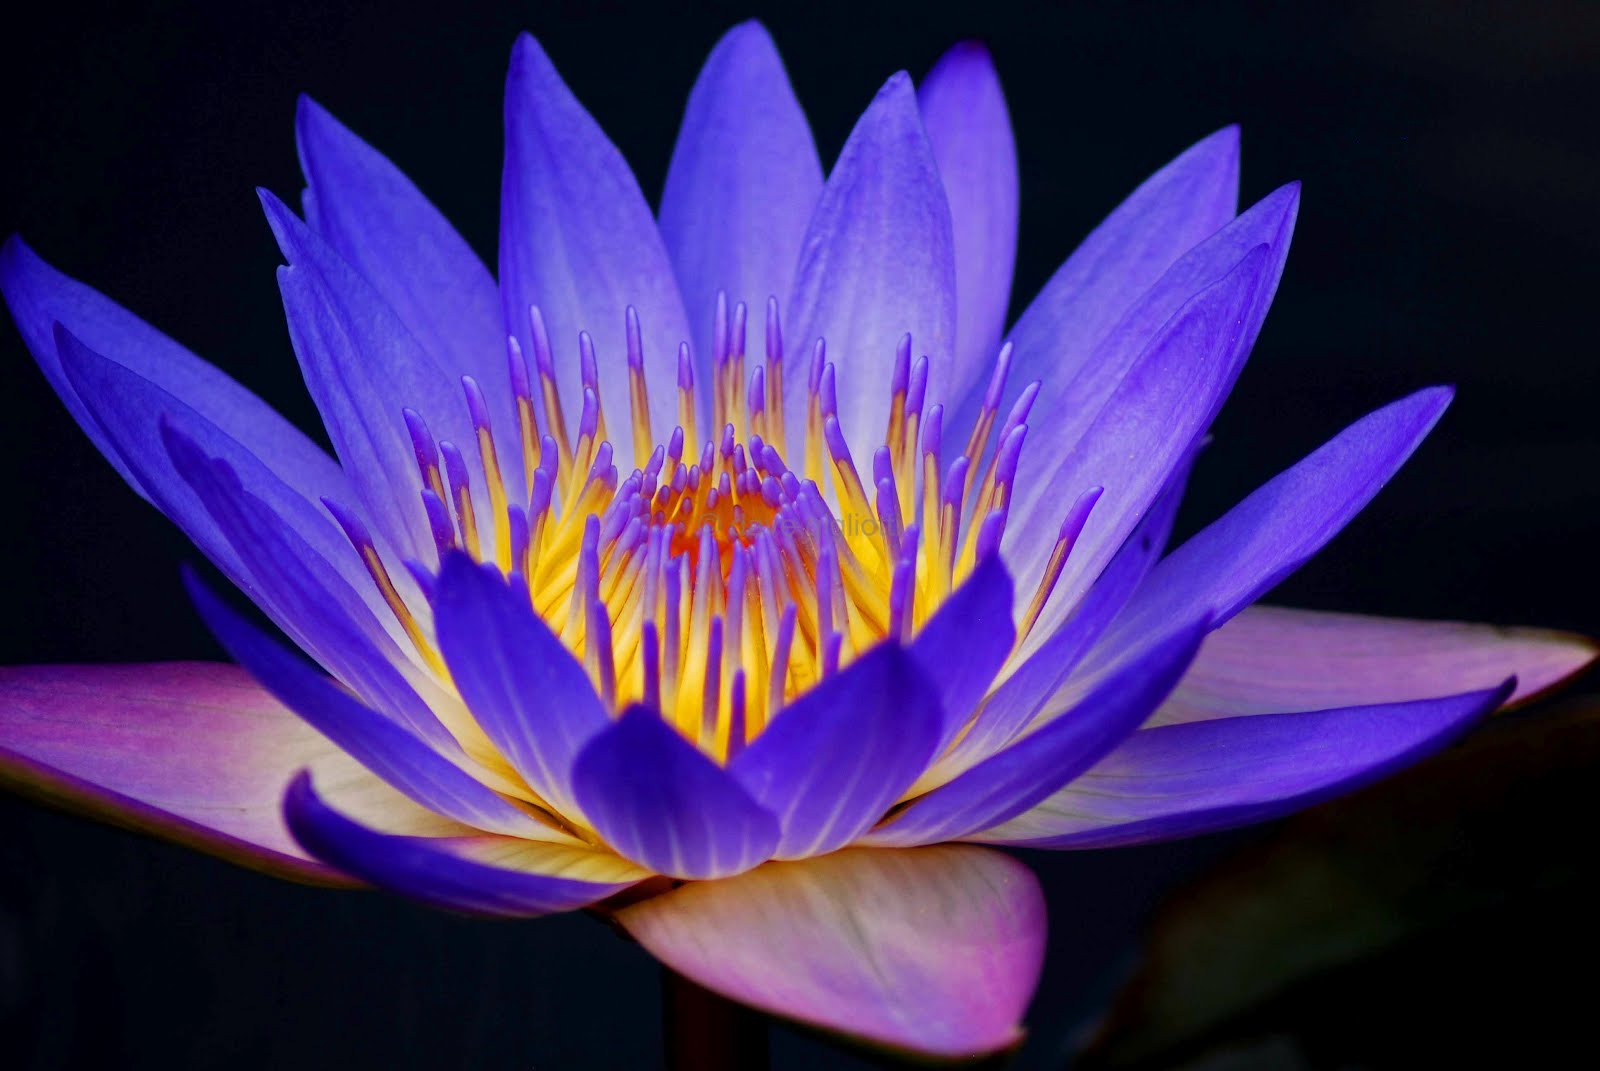 Gallery For gt Purple Water Lily Tattoo